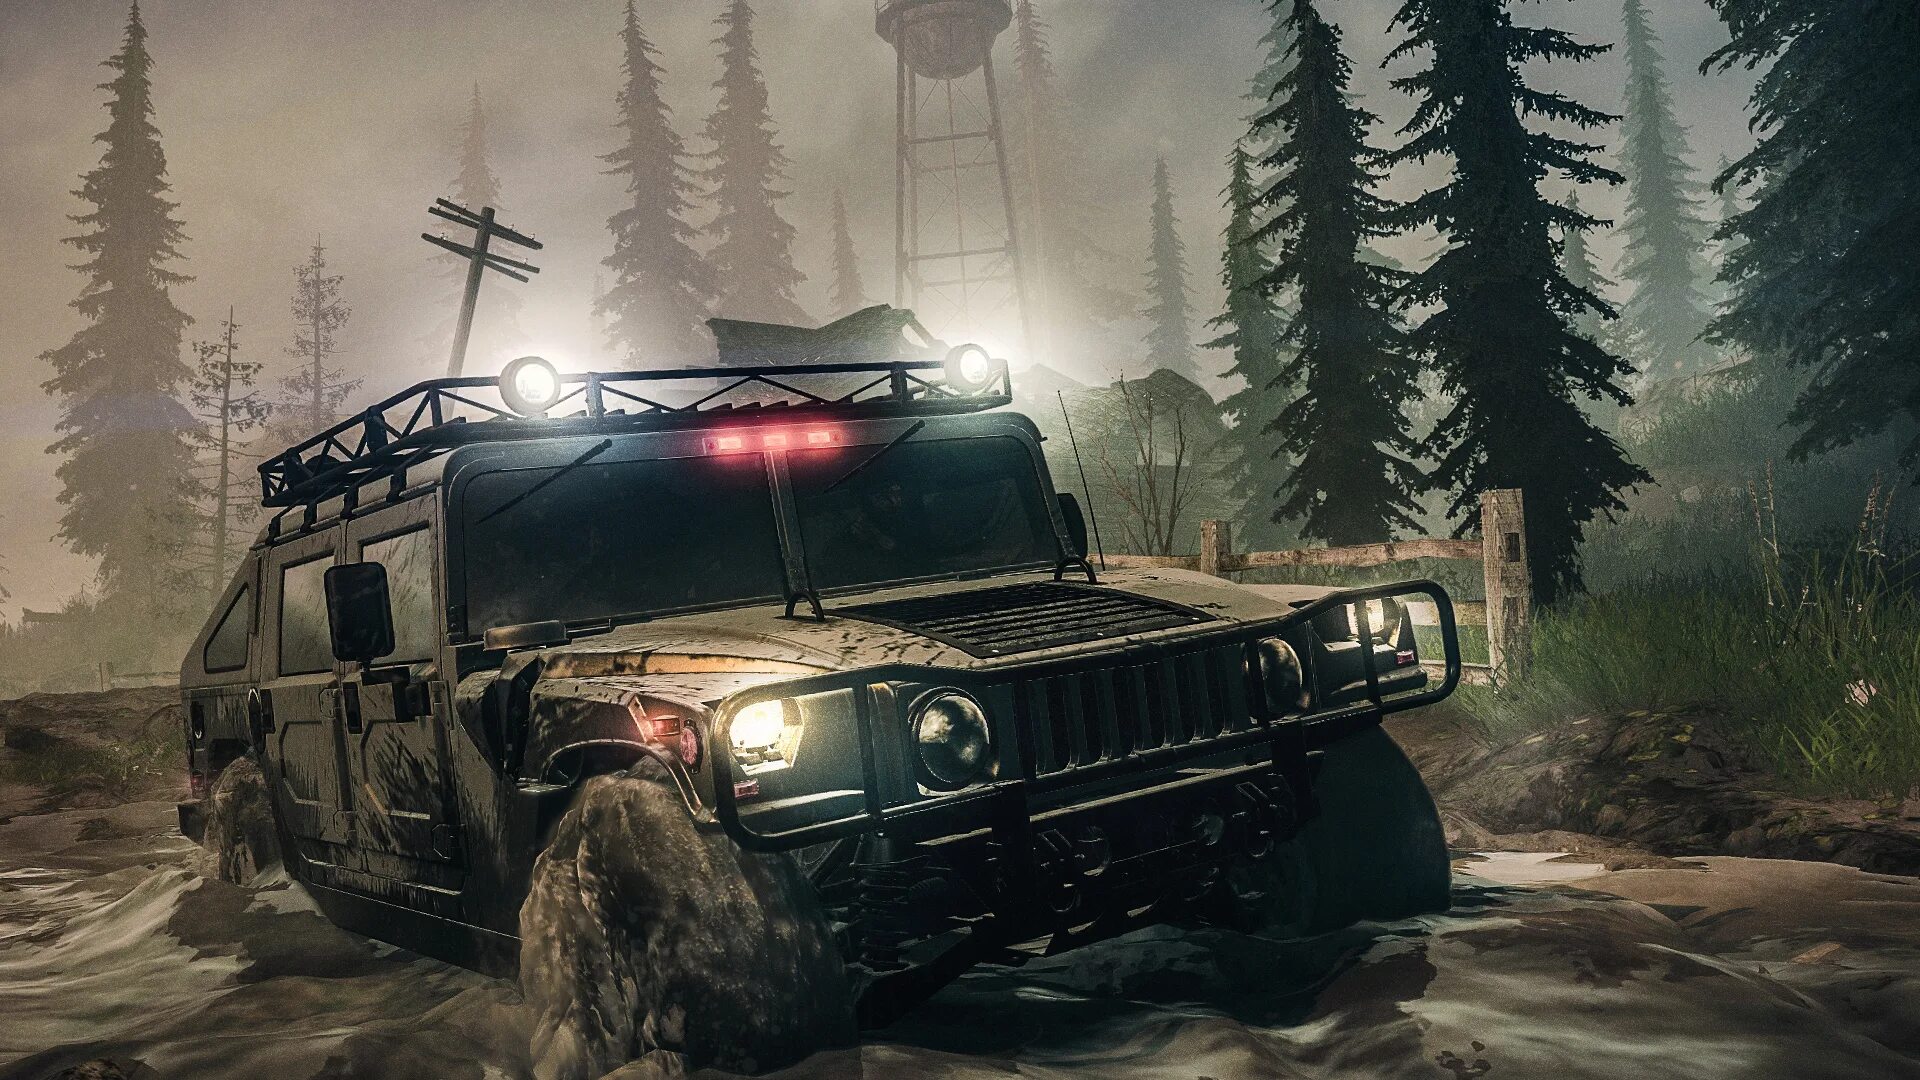 Игра Spin Tires MUDRUNNER. SPINTIRES Mud Runner. SPINTIRES: MUDRUNNER - American Wilds. MUDRUNNER American Wilds Edition.